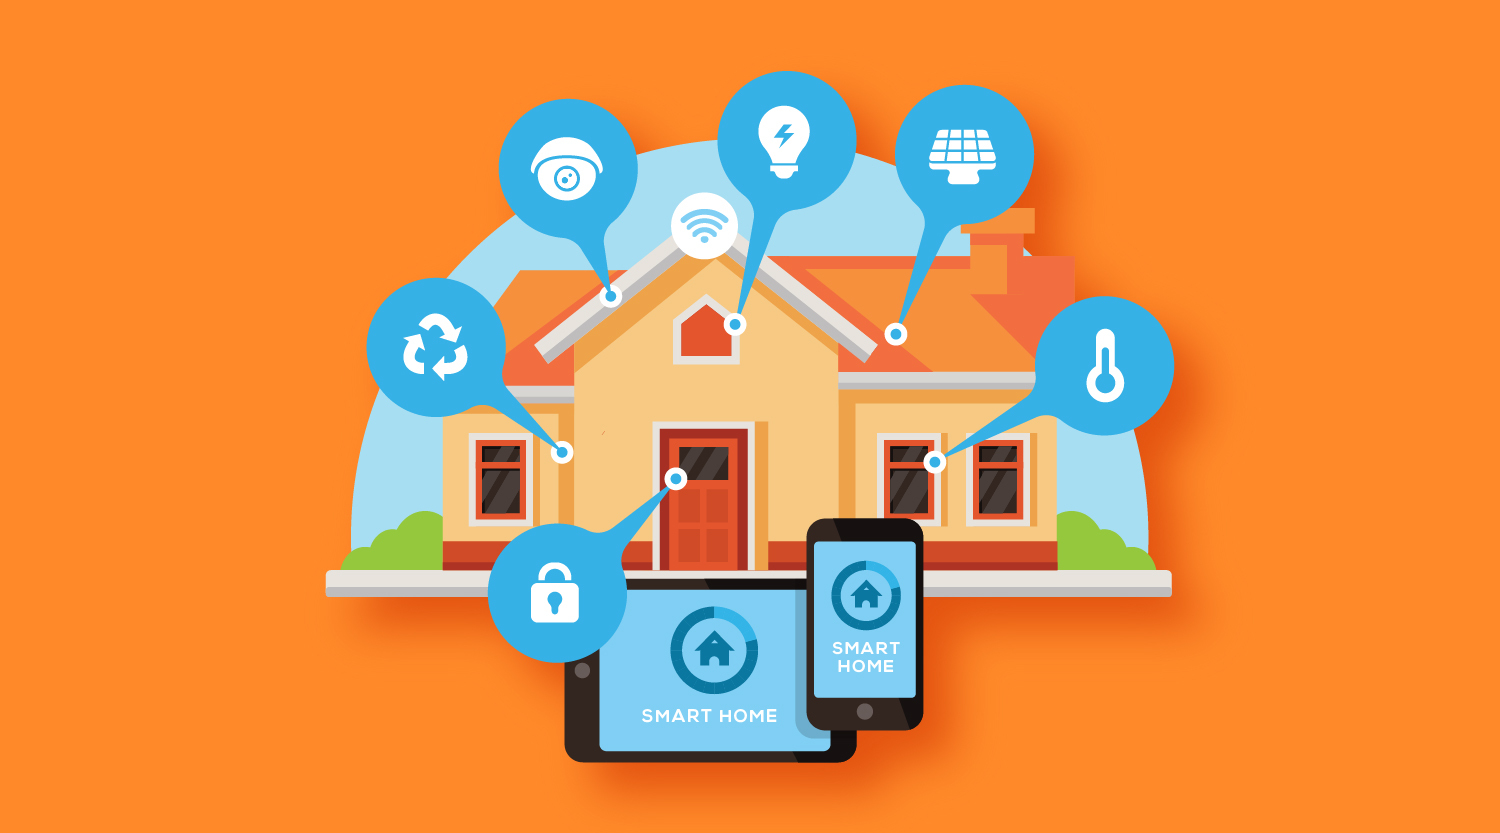 Home Automation Using IoT